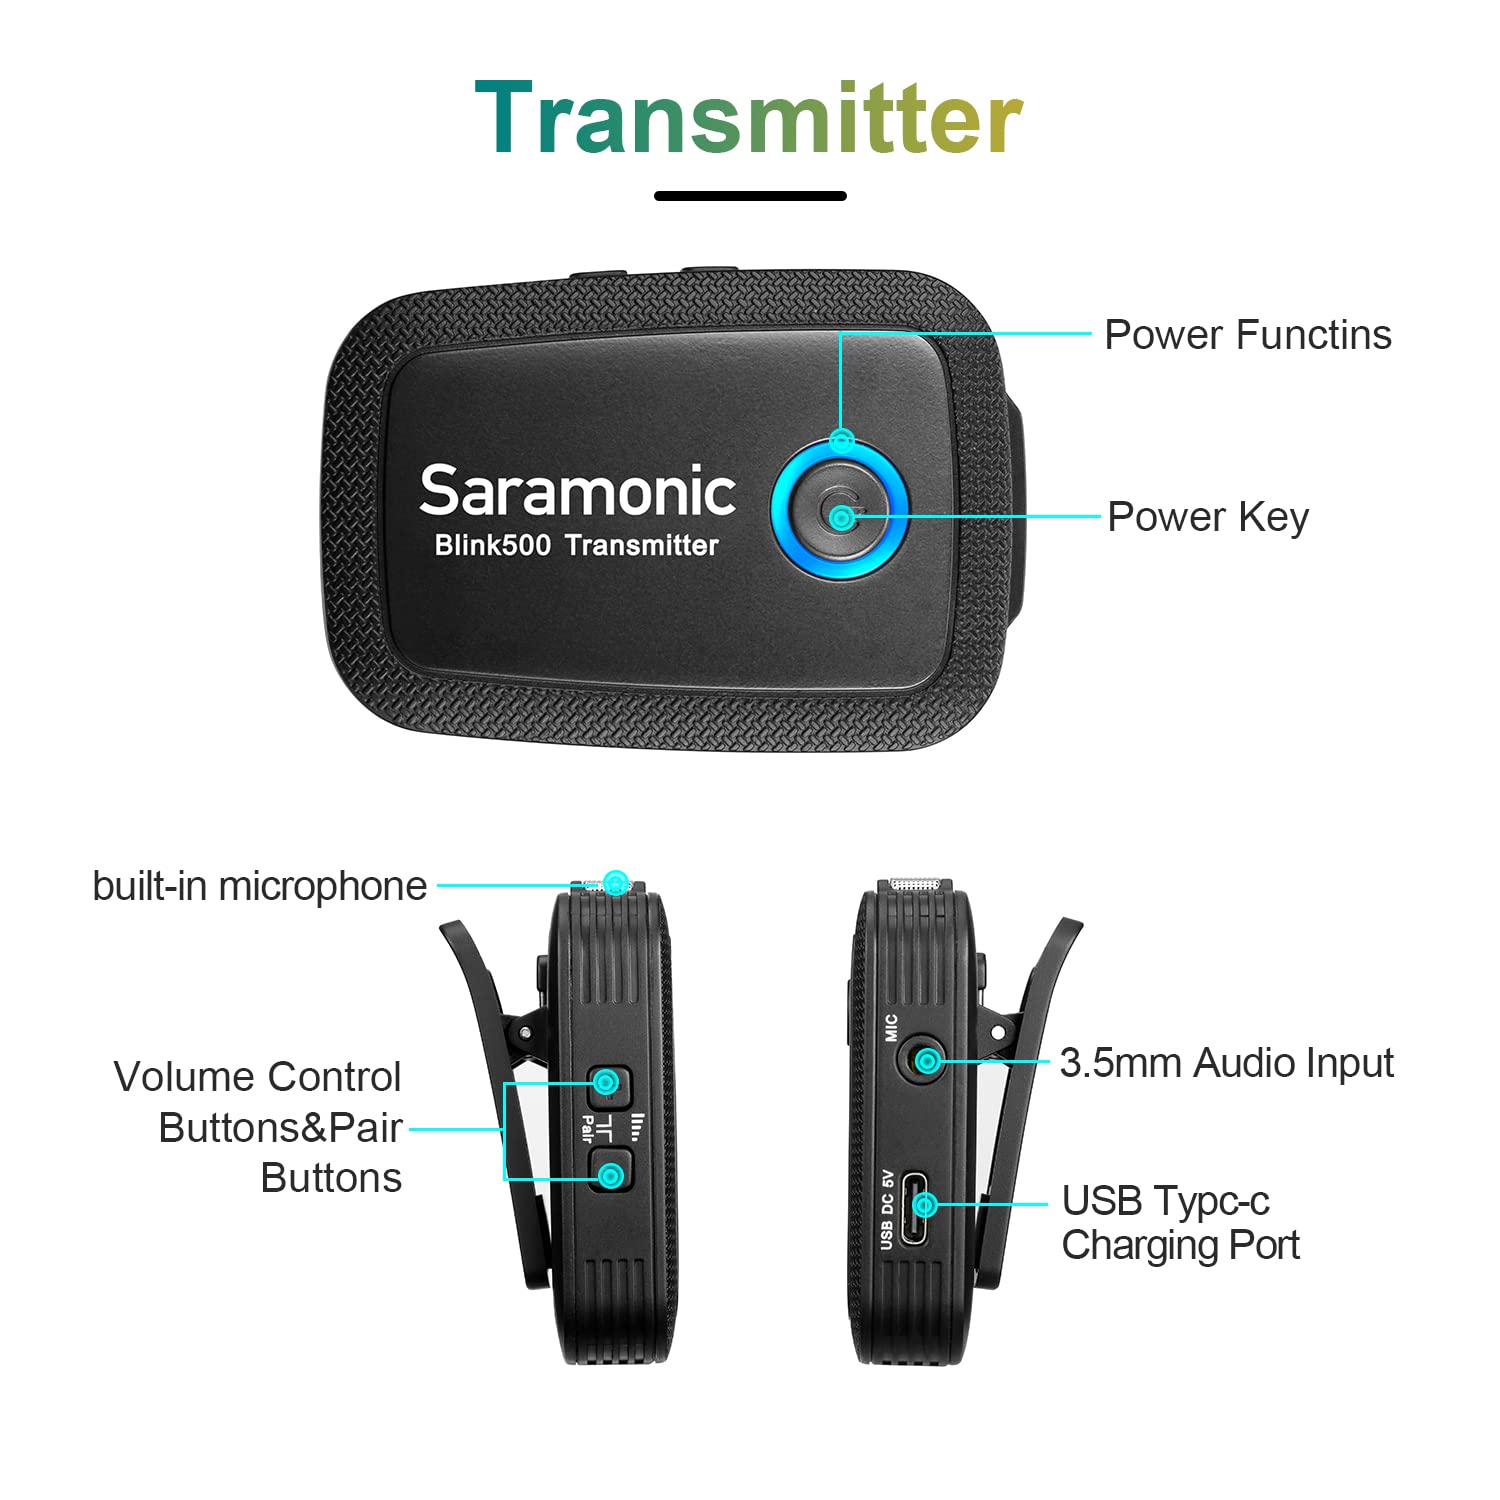 Saramonic Blink500 B1 Ultracompact 2.4GHz Dual-Channel Wireless Microphone System TX+RX for DSLR Mirrorless Camera iPhone Android for Tiktok Podcast Facebook Live YouTube Video Recording